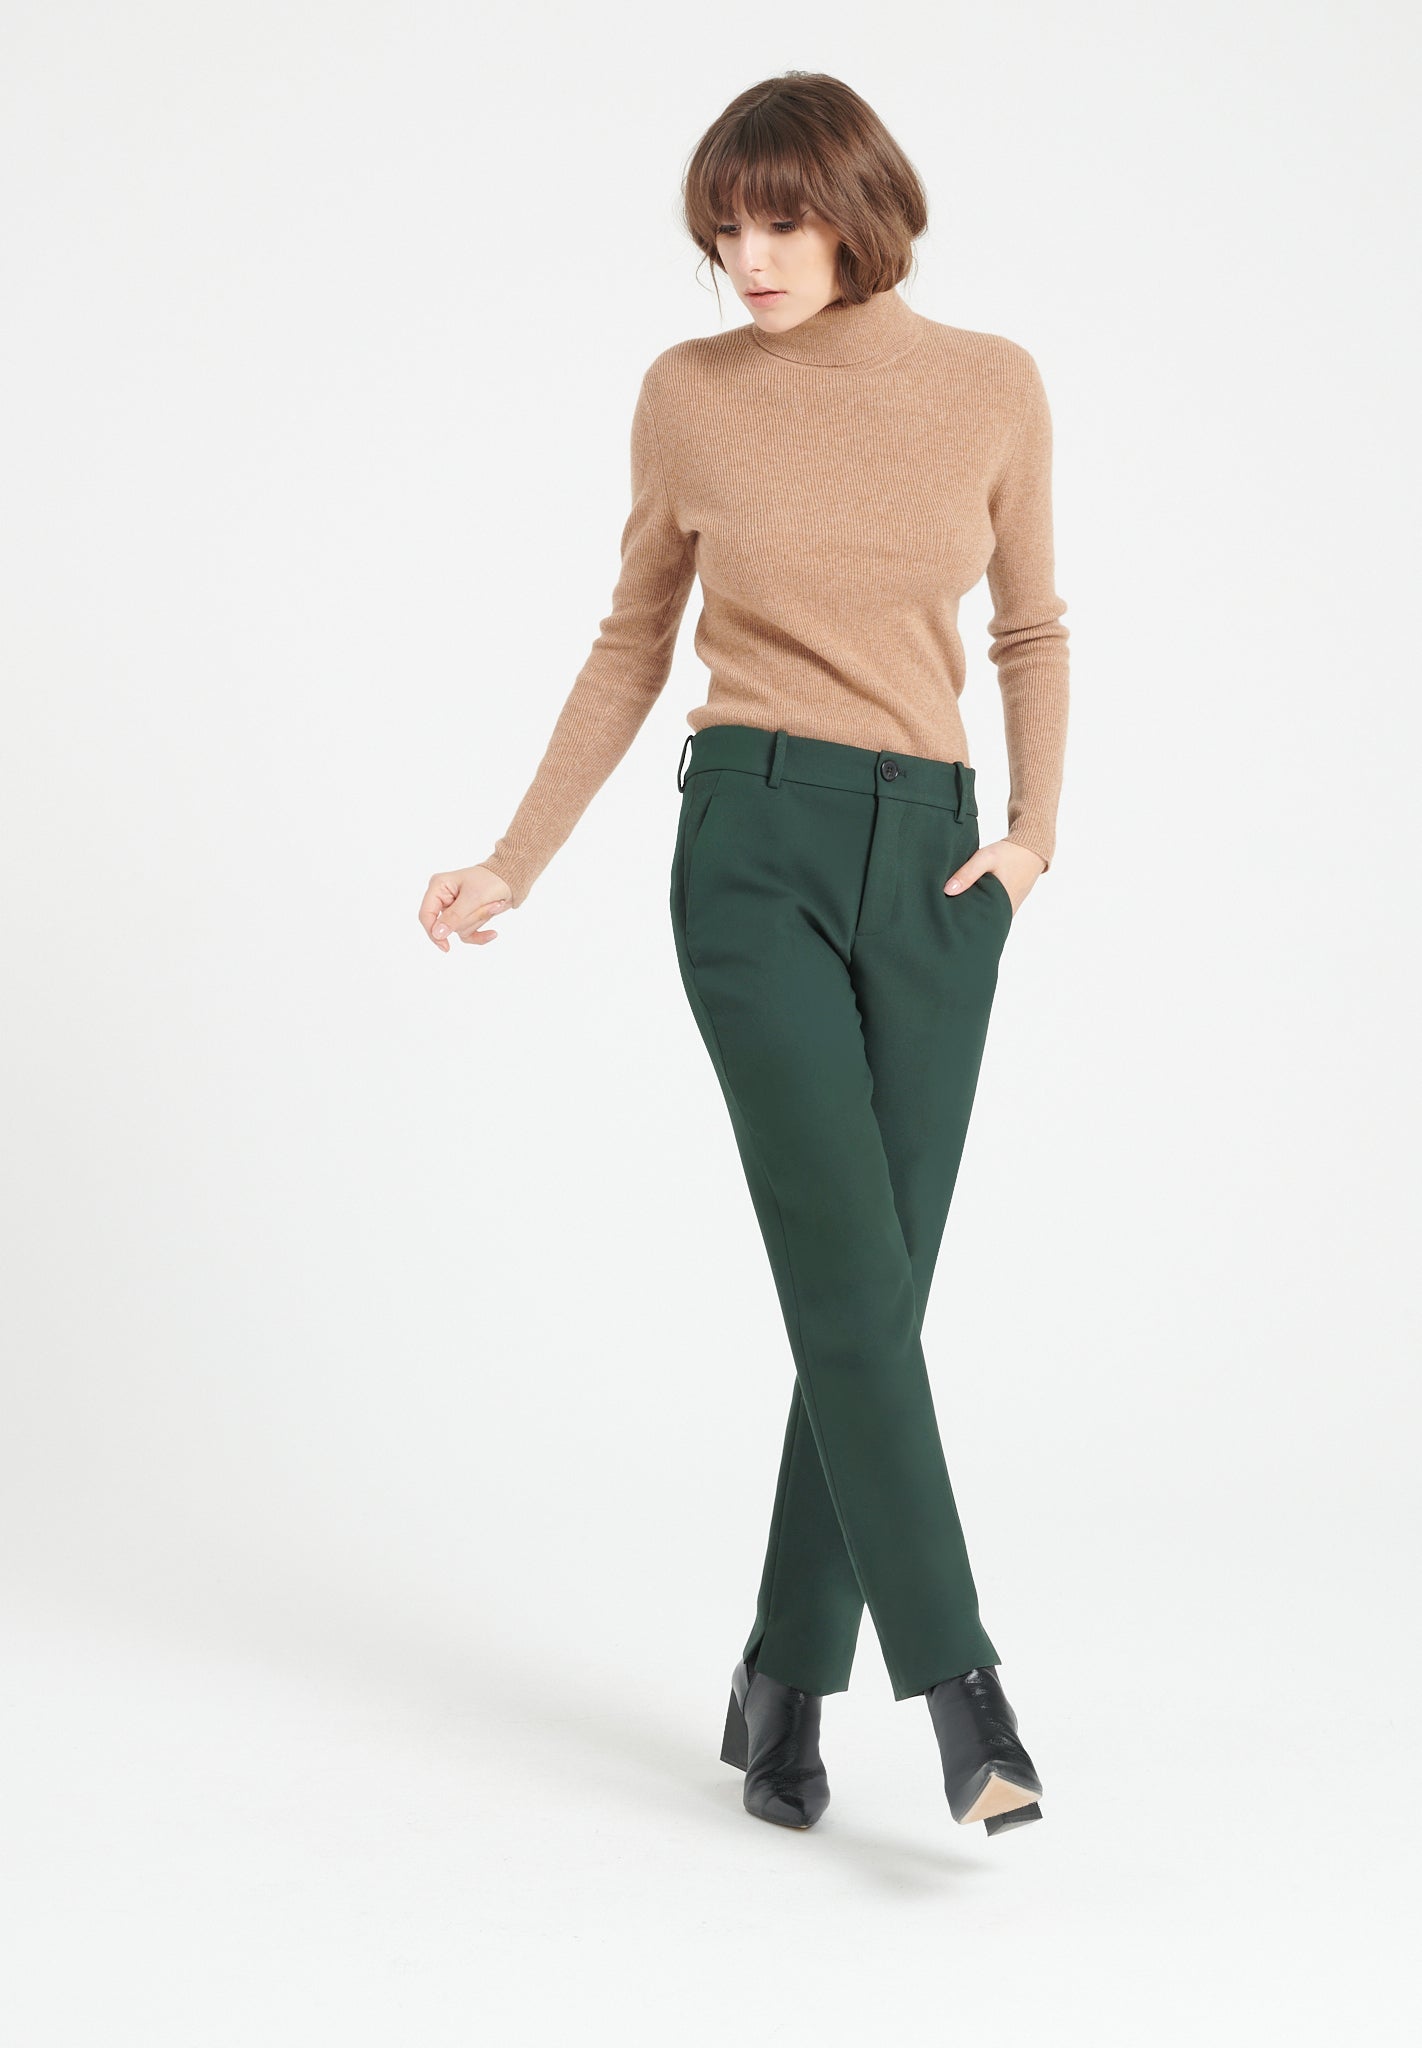 Pure Cashmere 4 ply Turtleneck Ribbed Sweater (Lilly 17)